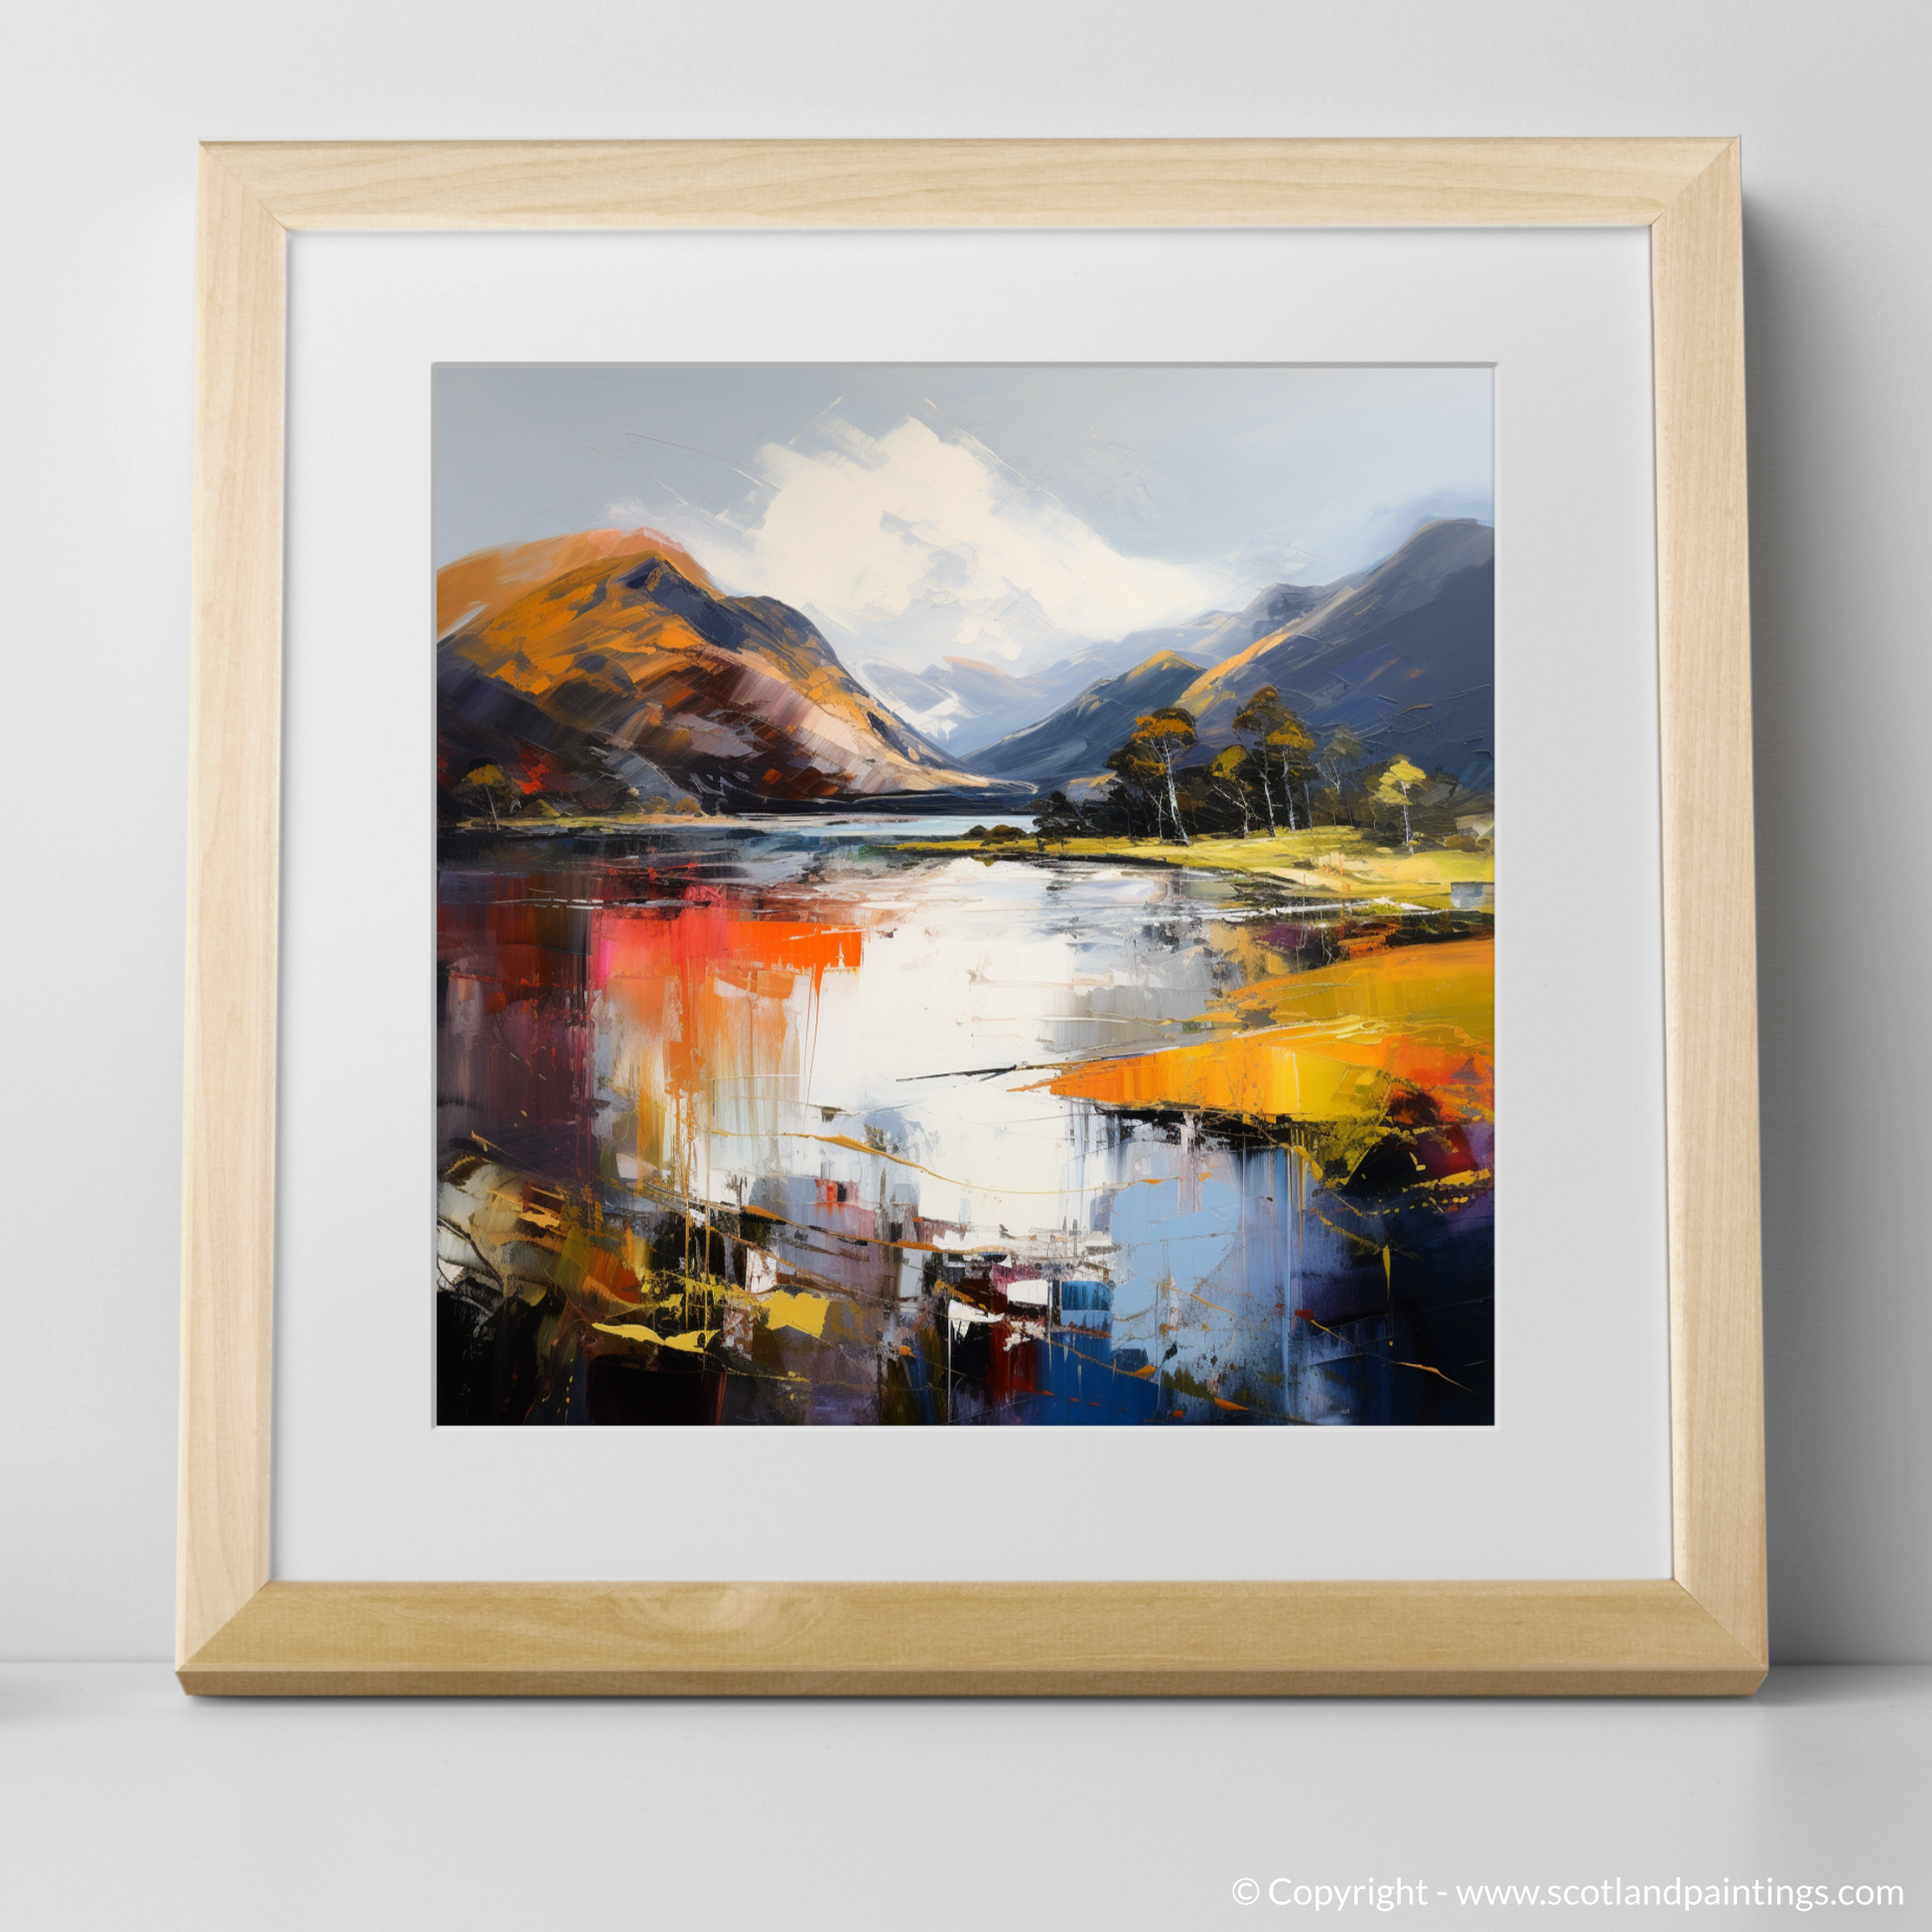 Art Print of Loch Shiel, Highlands with a natural frame